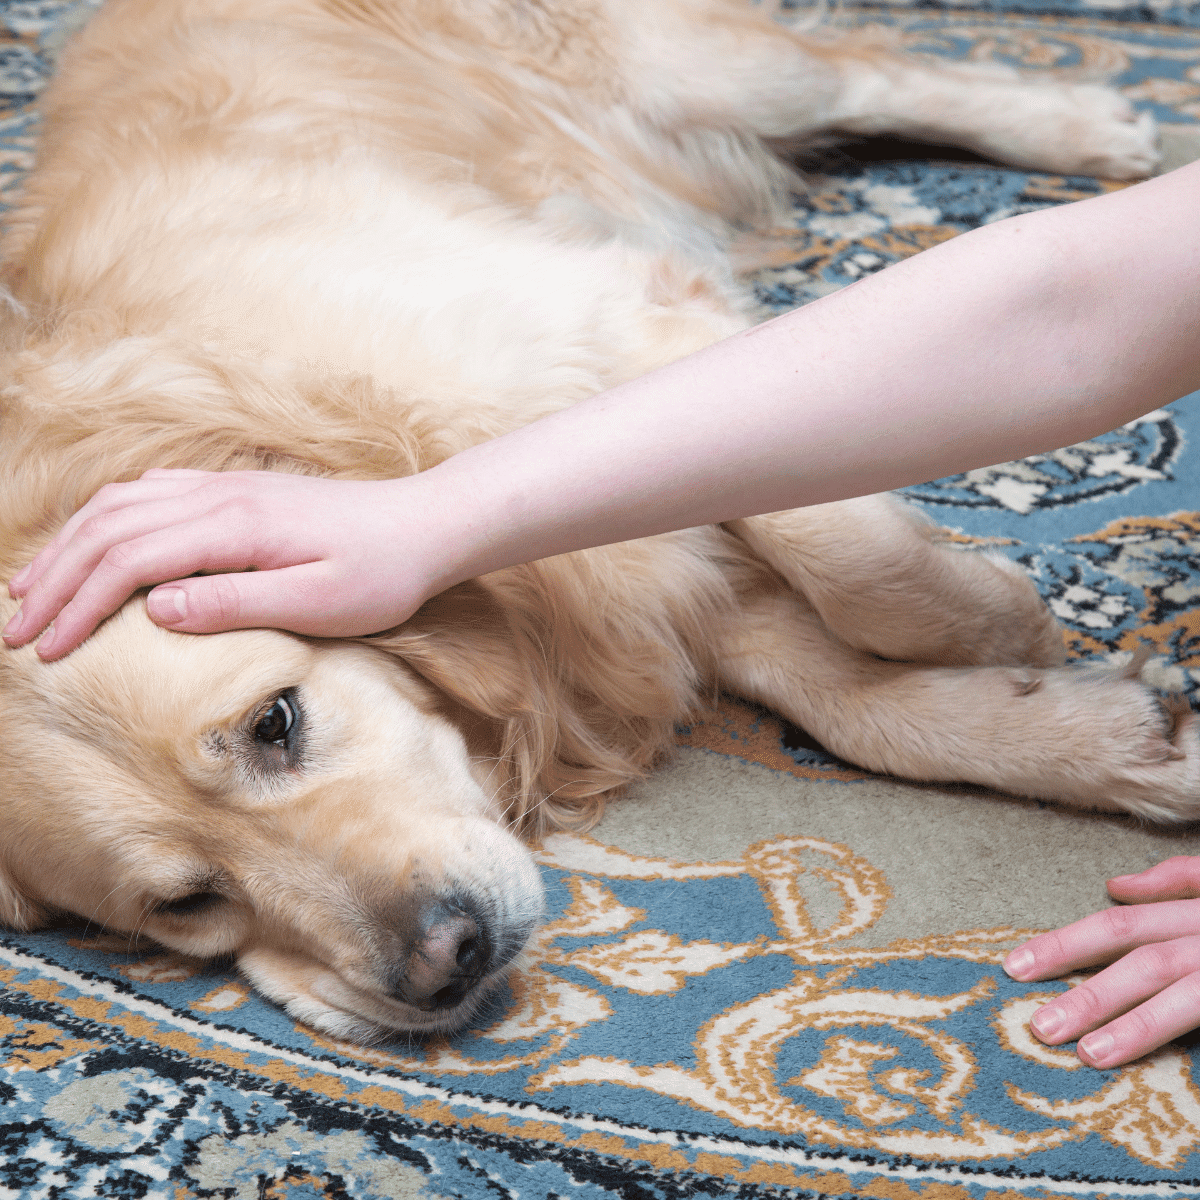 golden retriever dog looking ill and sick and lying on colored carpet with someone petting his head